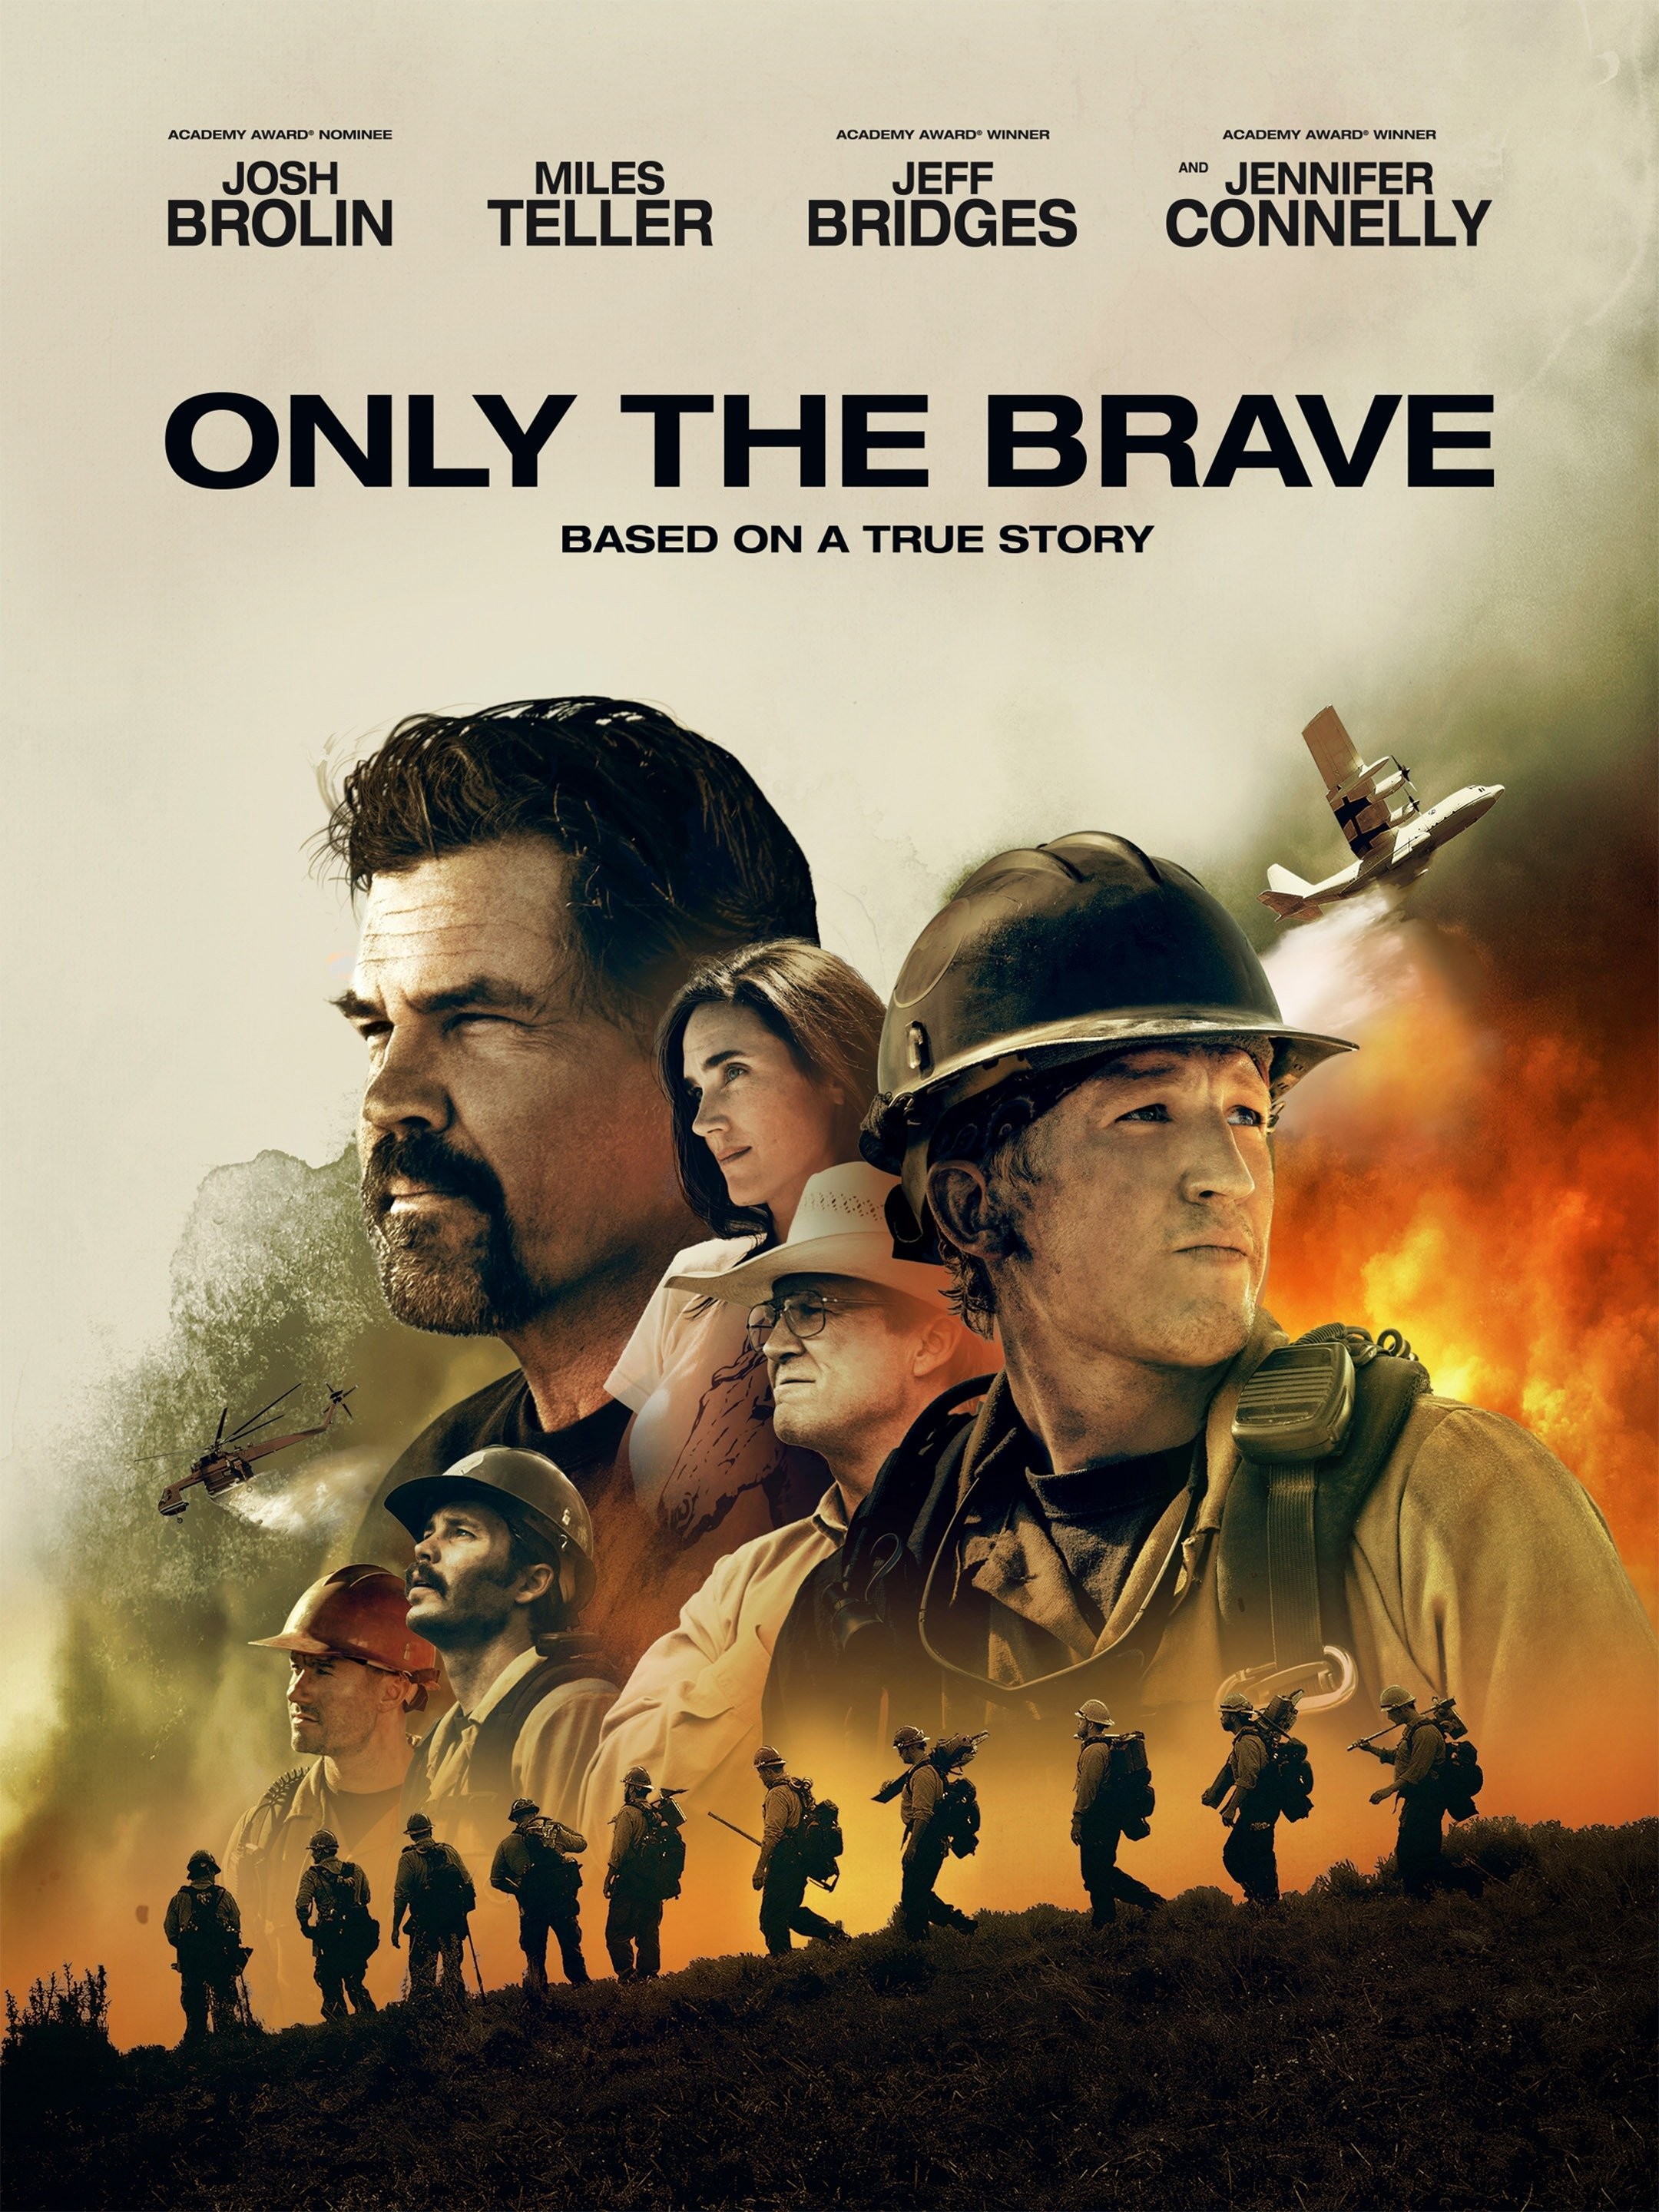 The Brave One streaming: where to watch online?